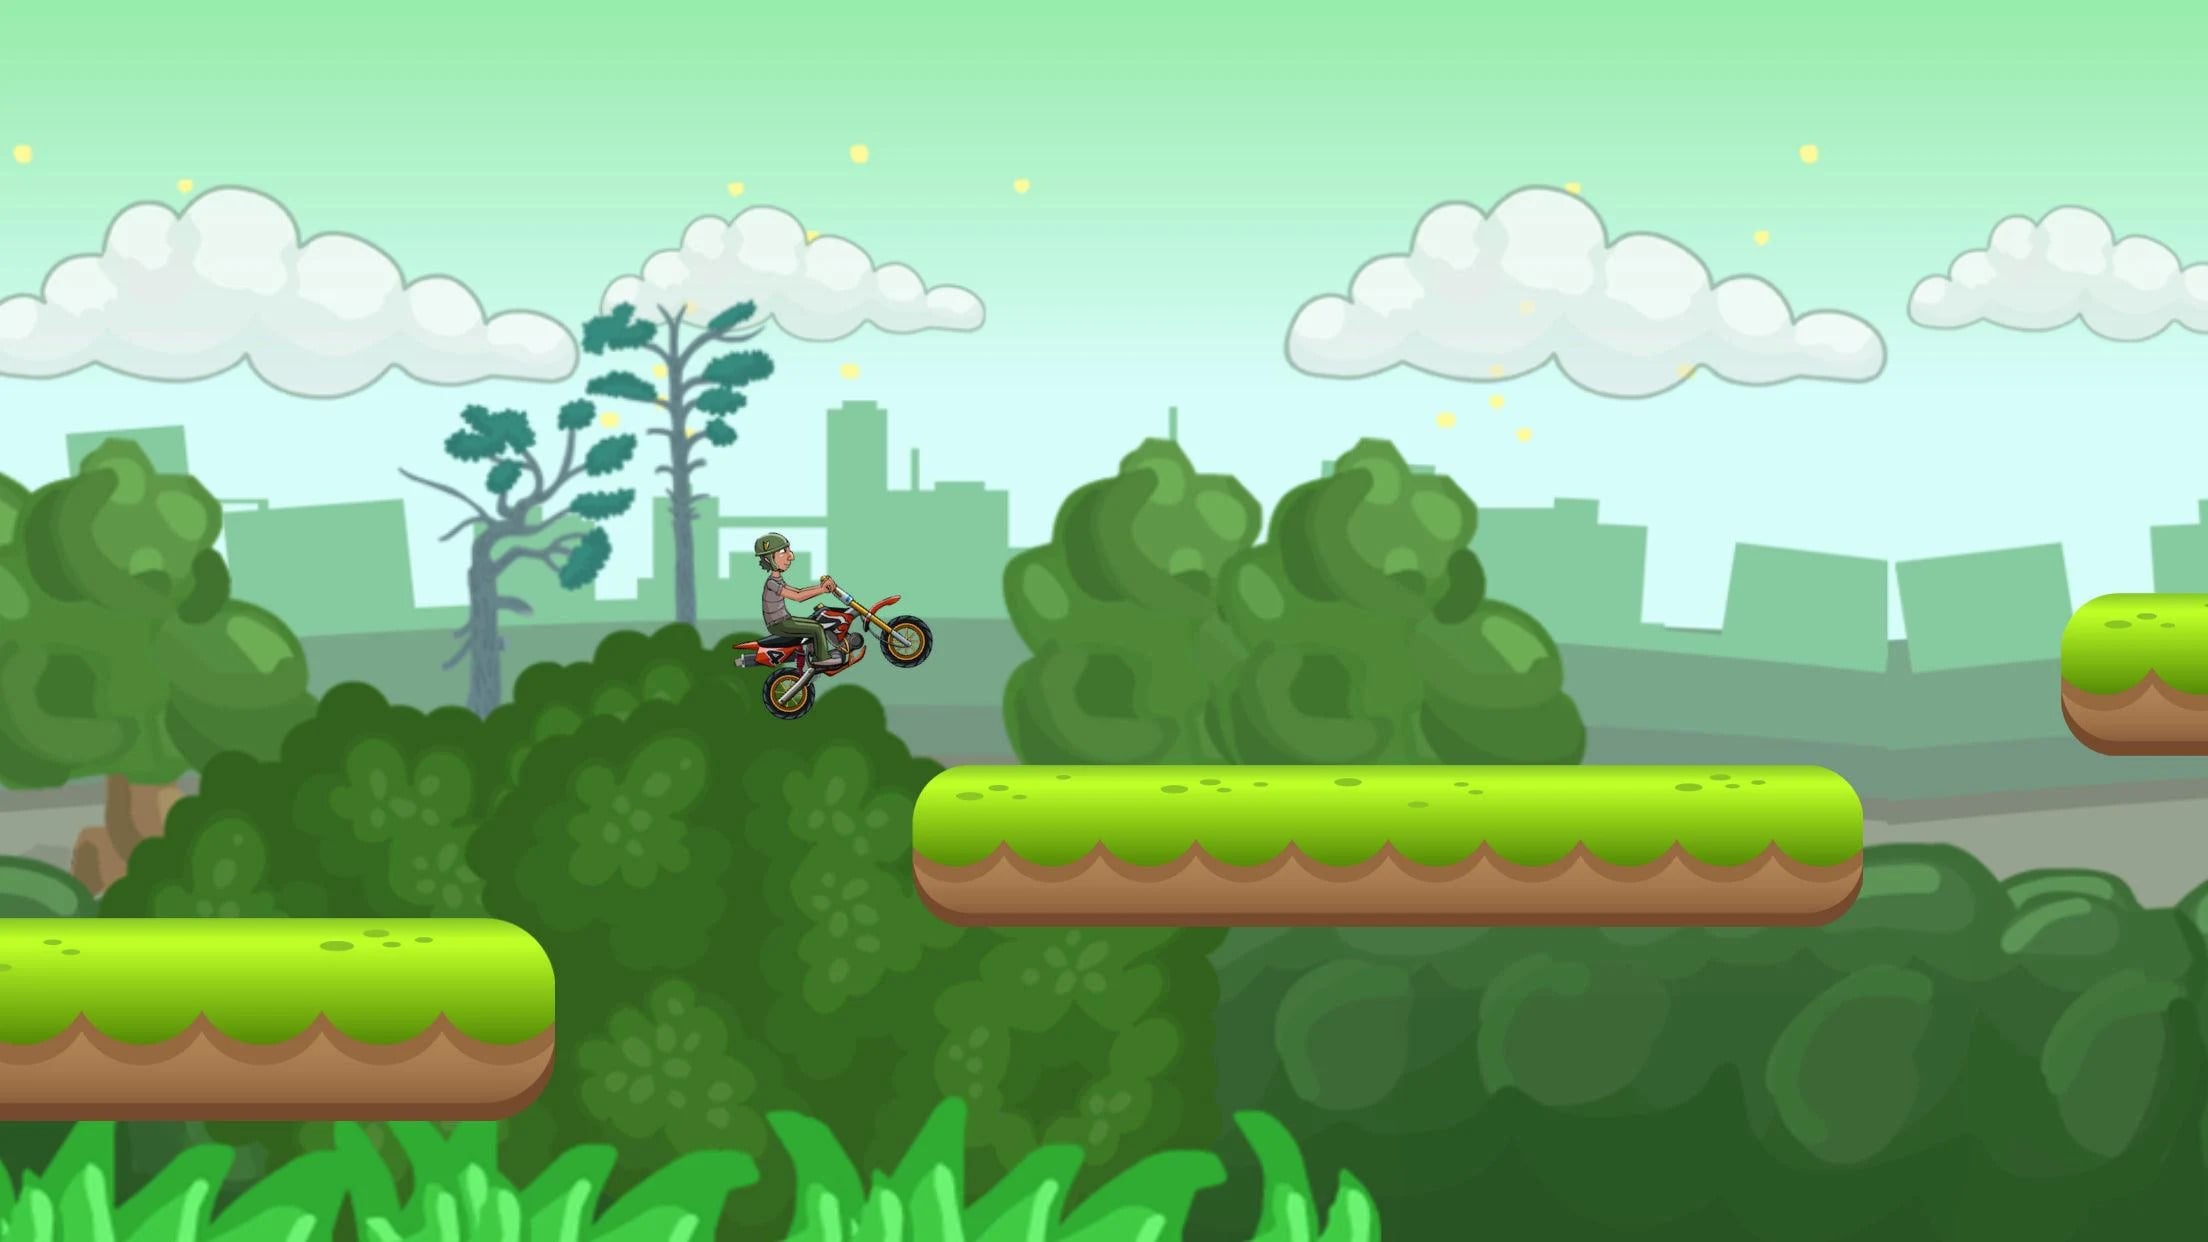 Motorbike Offroad: An Exciting Off-Road Racing Game